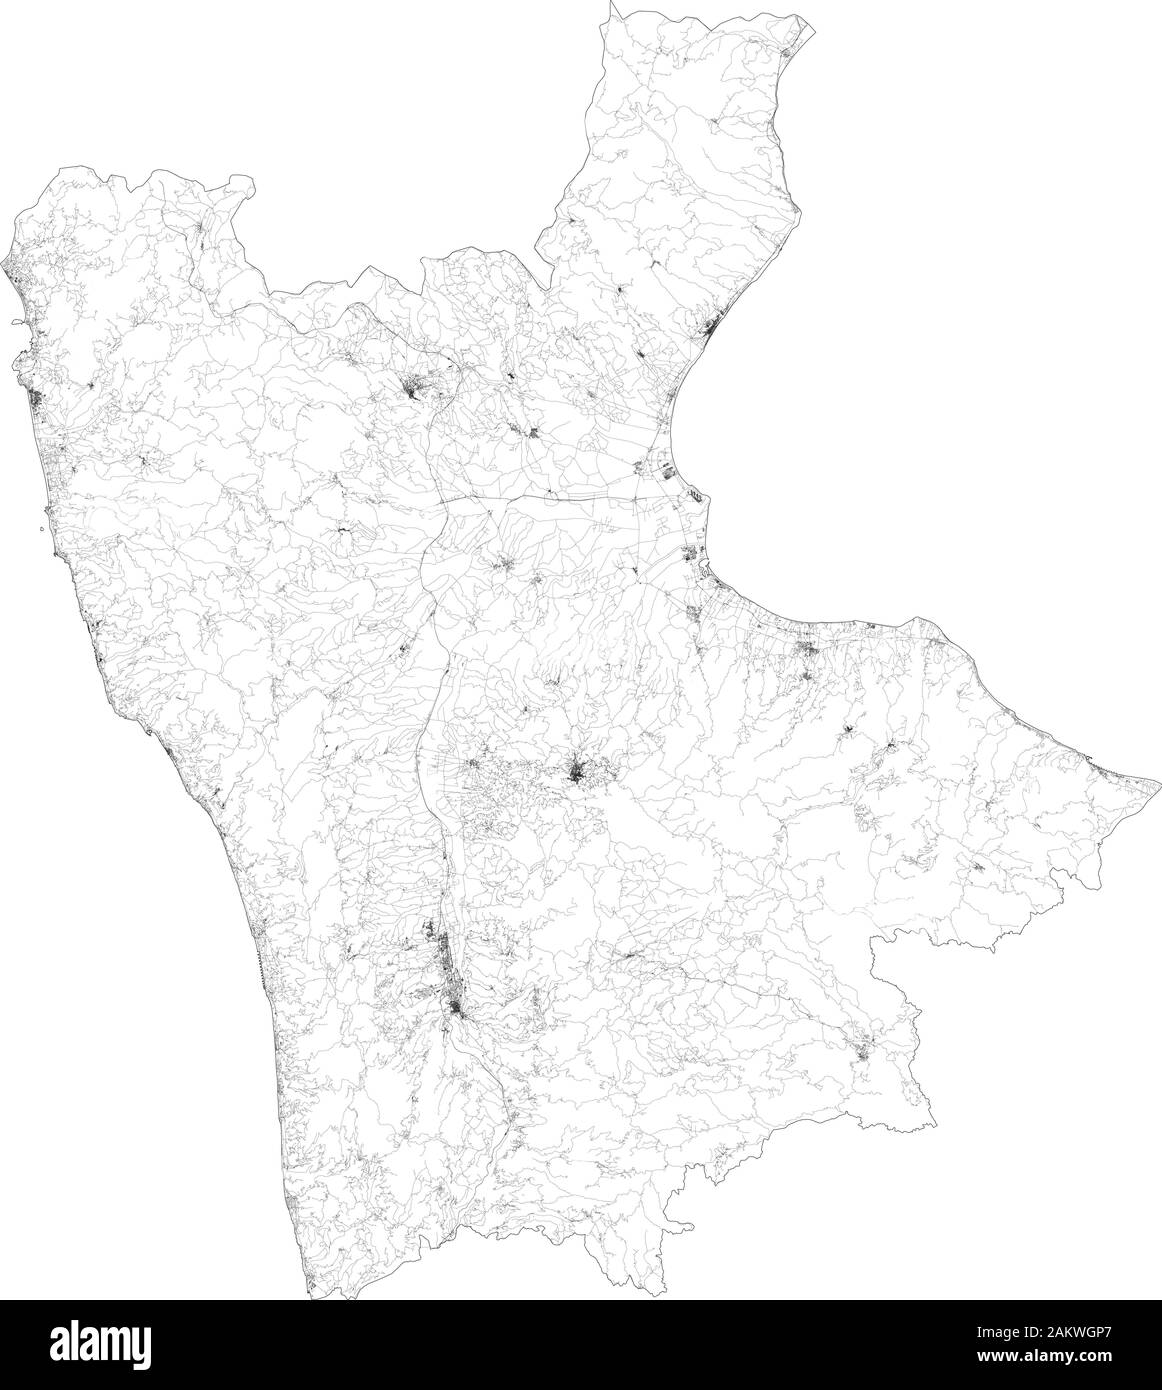 Satellite map of Province of Cosenza towns and roads, buildings and connecting roads of surrounding areas. Calabria region, Italy. Map roads Stock Vector